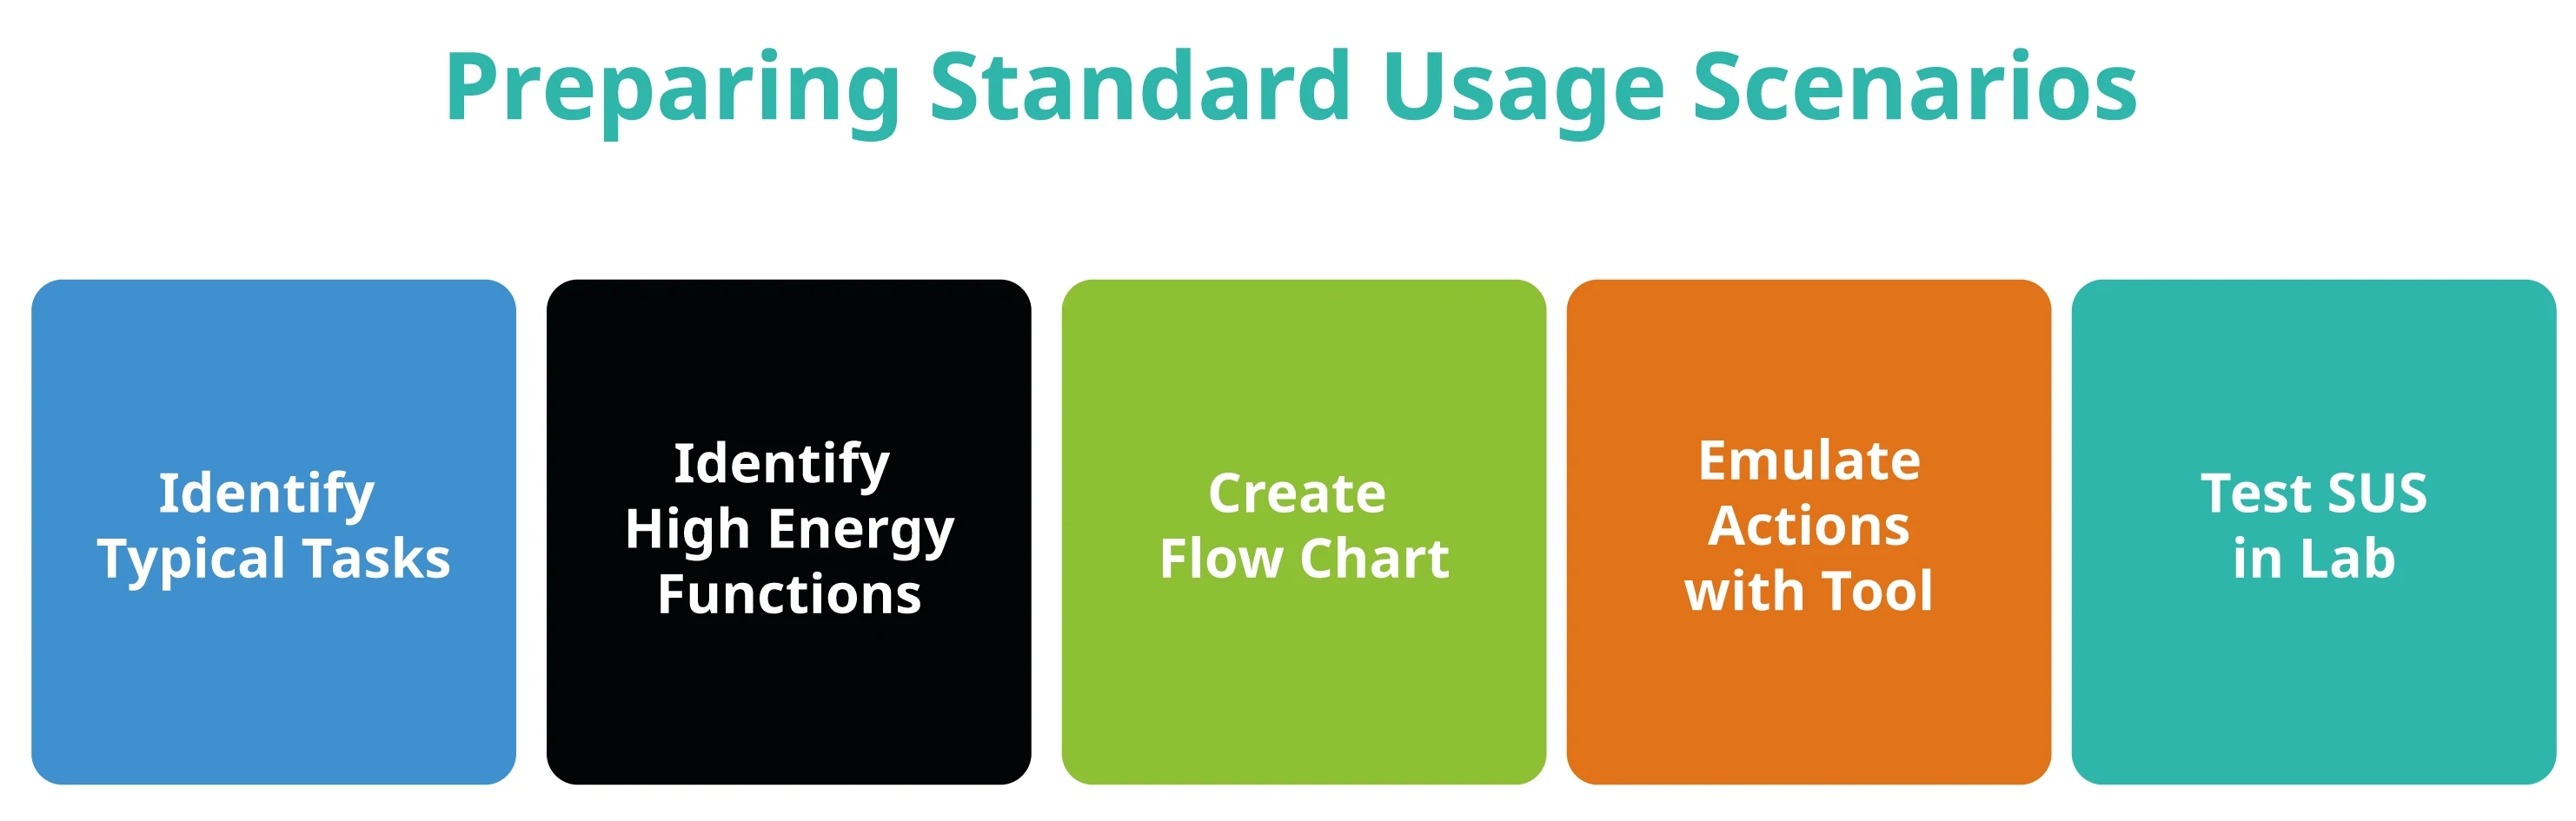 Steps for preparing Standard Usage Scenario (SUS) scripts to measure the energy consumption of software. (Image from the <a href="https://eco.kde.org/handbook/">KDE Eco Handbook</a> published under a <a href="https://spdx.org/licenses/CC-BY-SA-4.0.html">CC-BY-SA-4.0</a> license.)